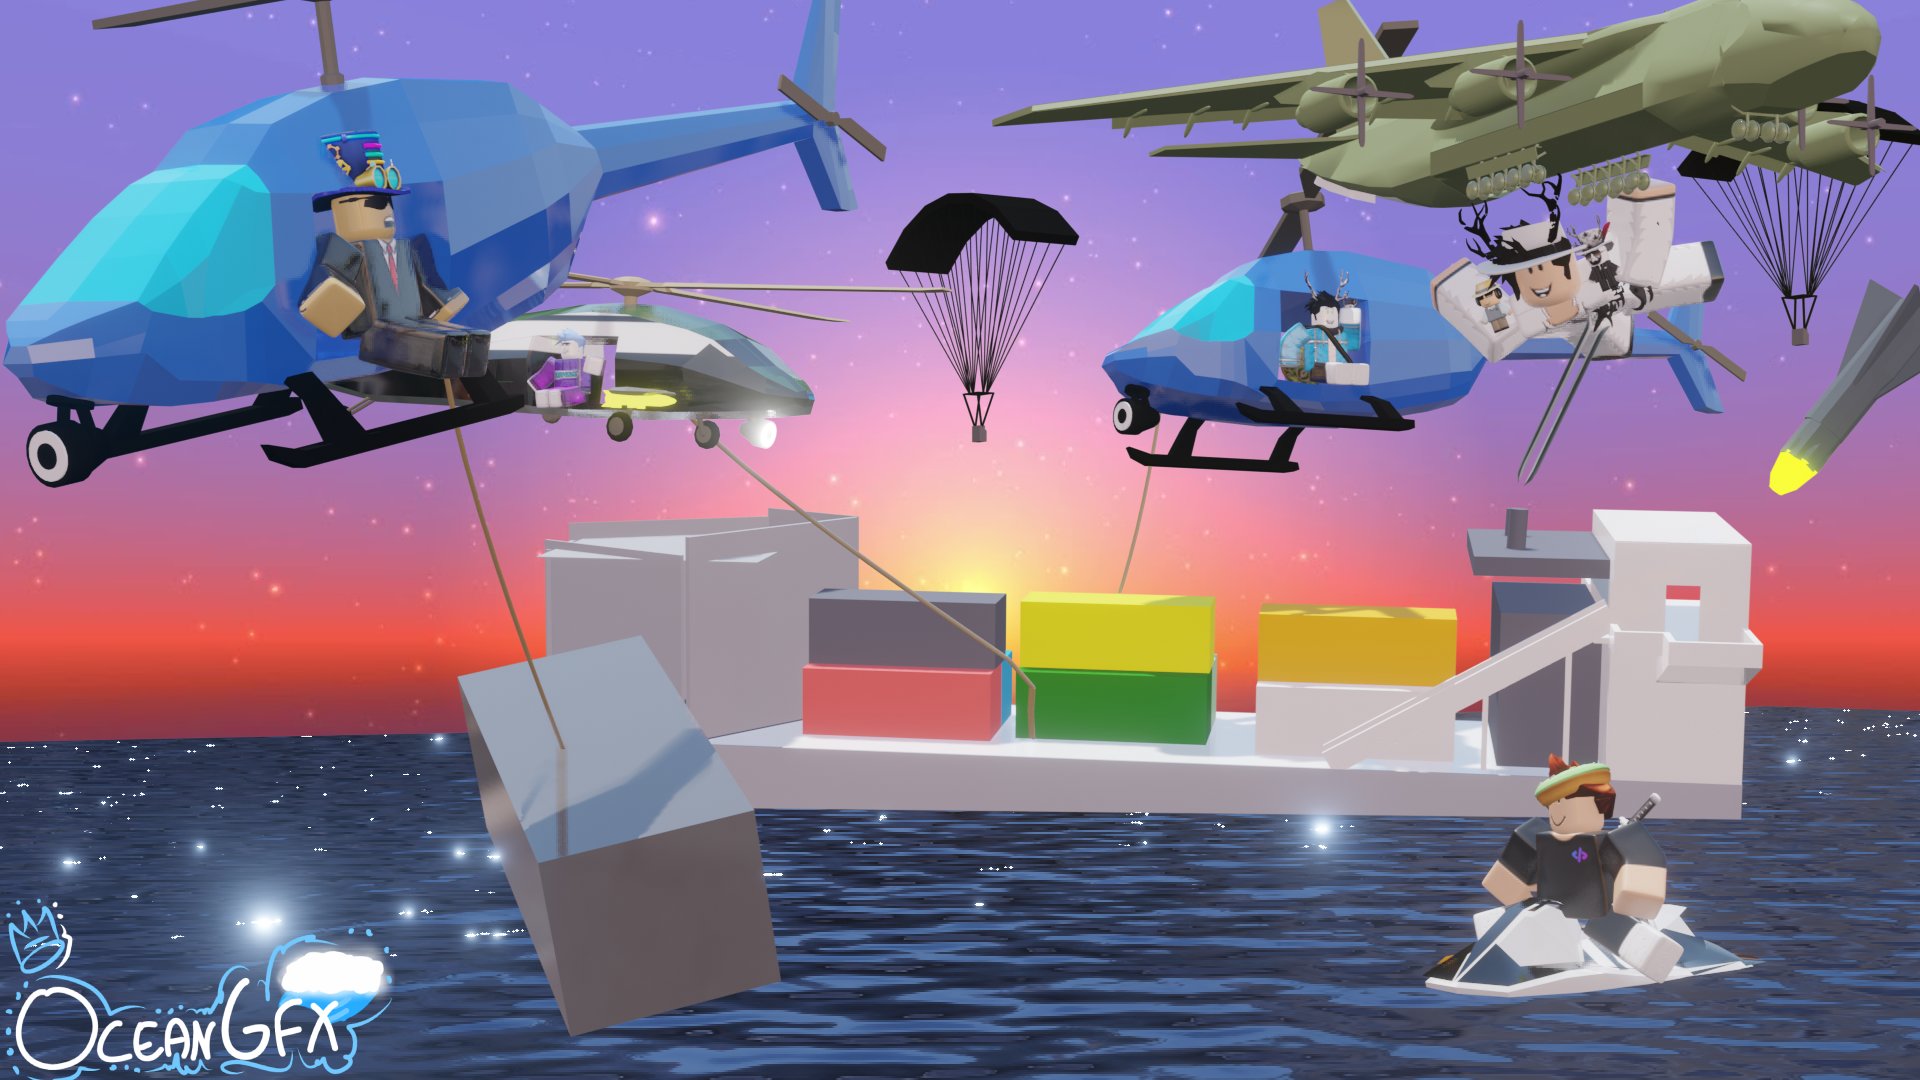 Oceanrblx On Twitter Are You Ready For The Cargo Ship Robbery Update In Roblox Jailbreak Tonight I Certainly Am That S Why I Have Created This Inspired Render For Asimo3089 And Badccvoid On - roblox robber gfx